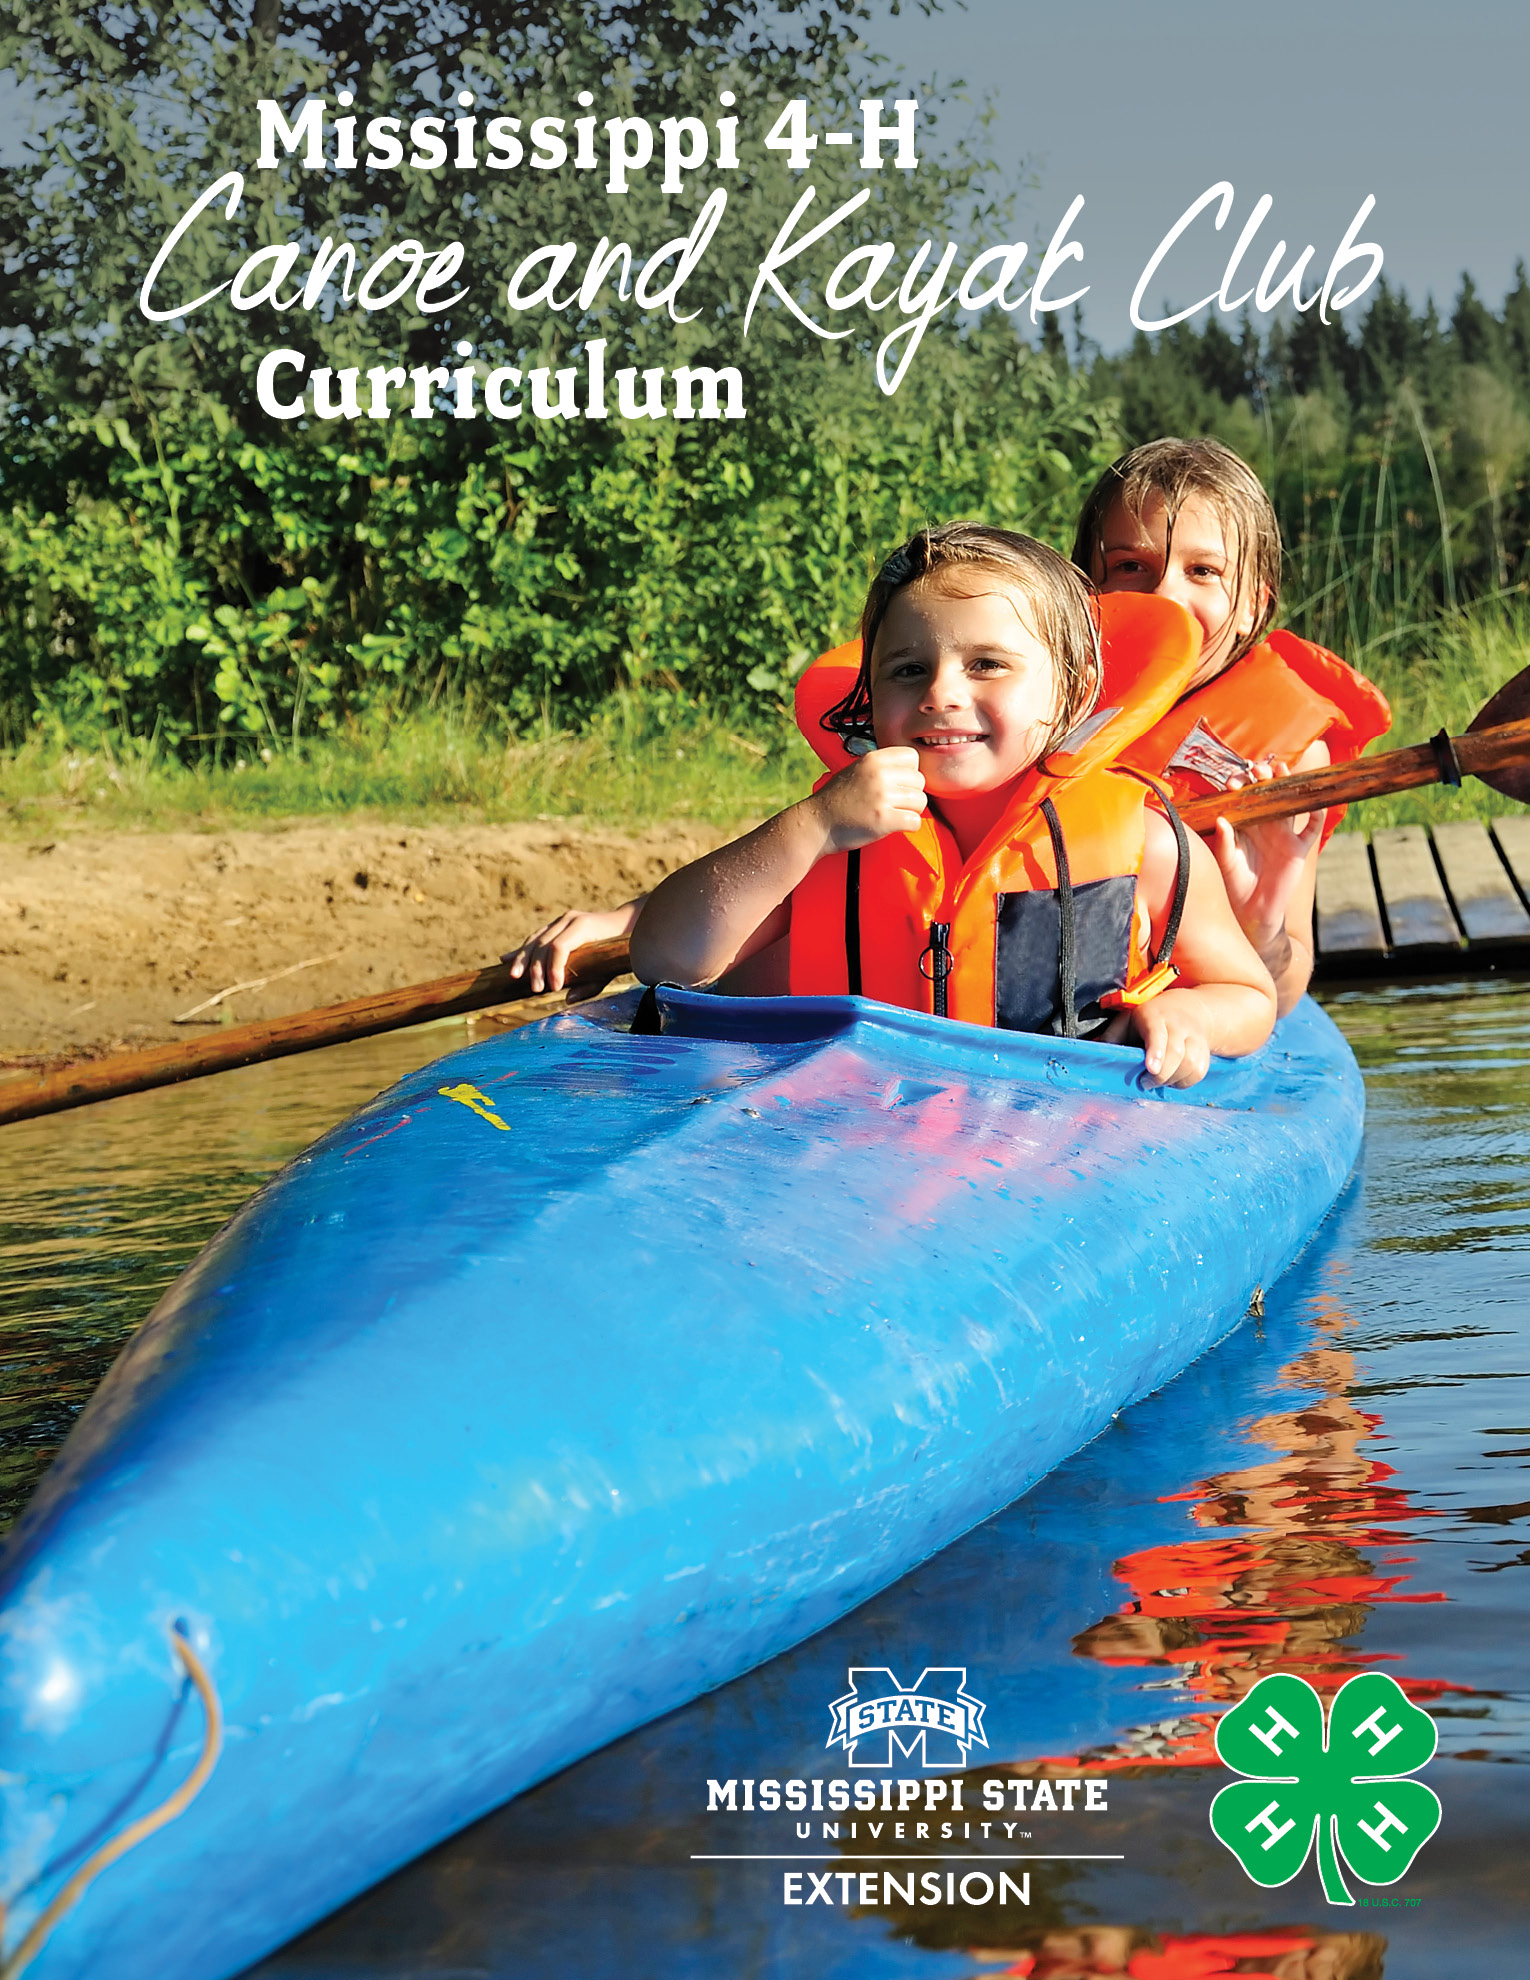 The front cover of the Mississippi 4-H Canoe and Kayak Club Curriculum has two smiling children wearing life jackets in a canoe on the water.